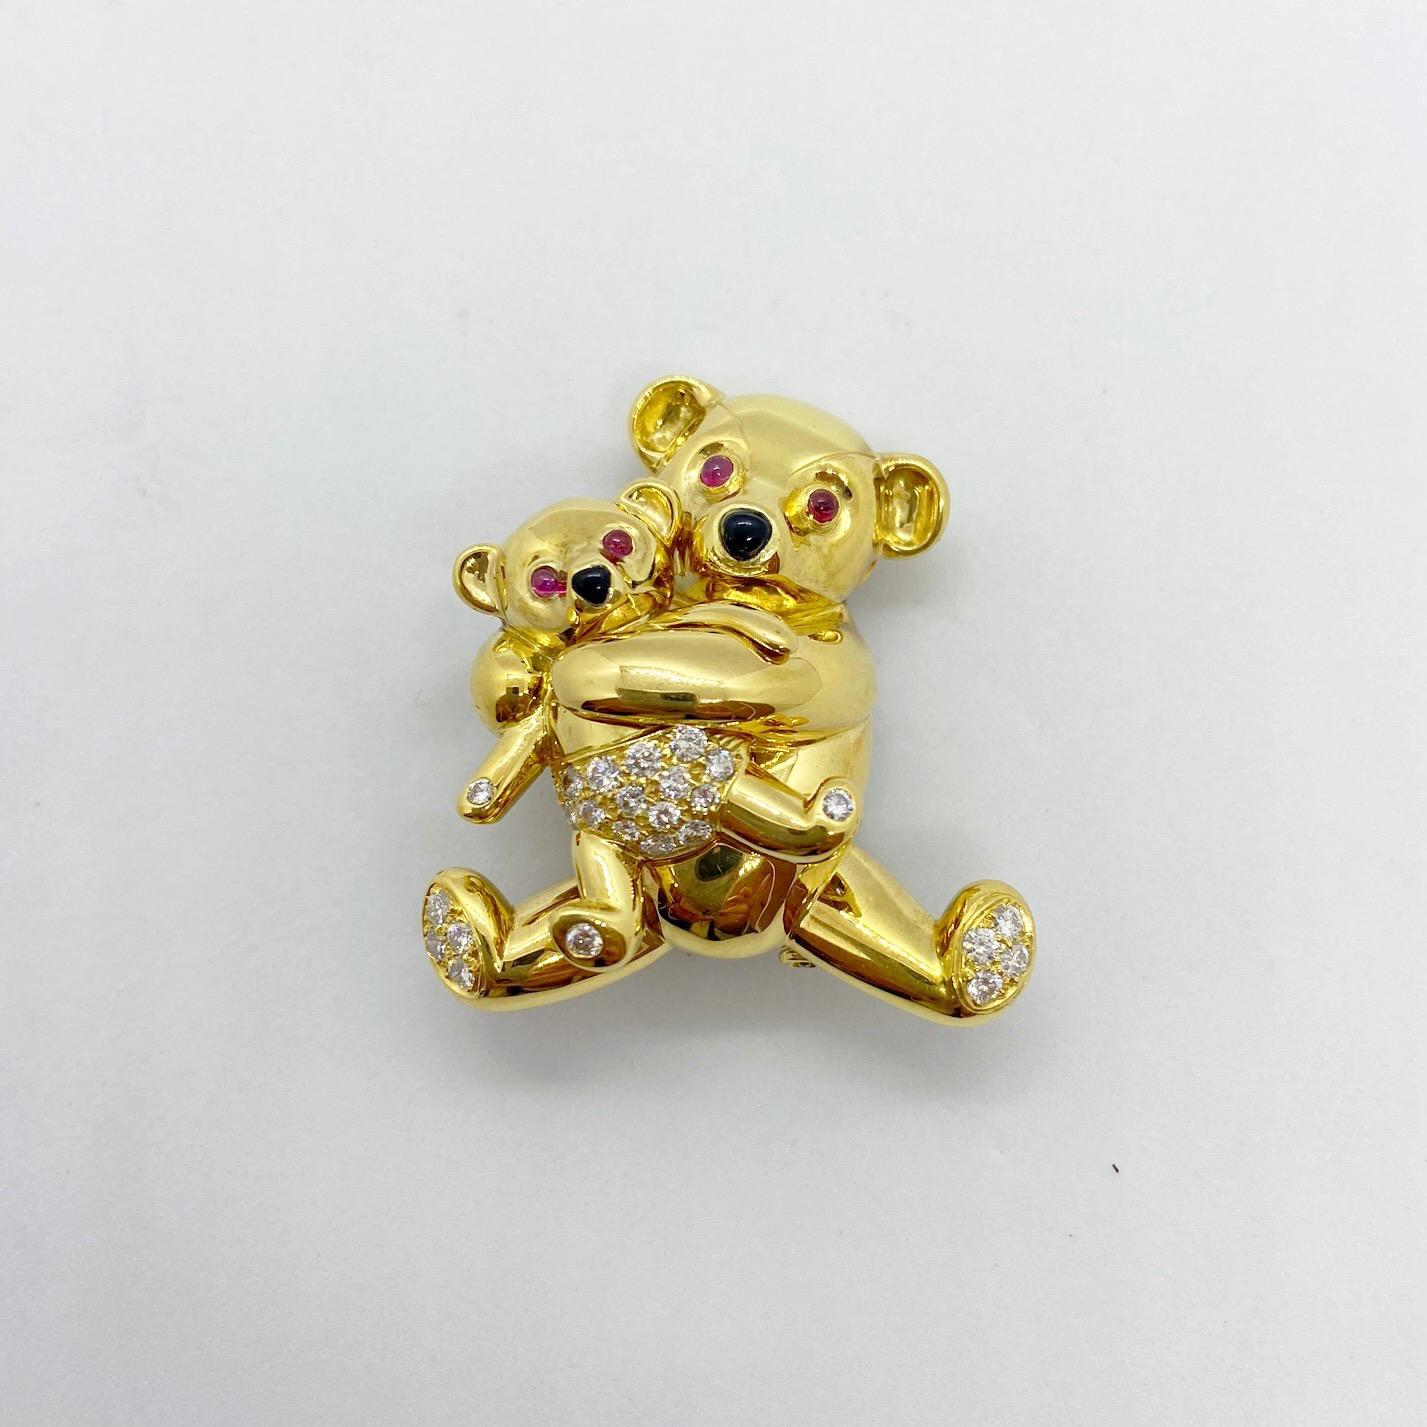 Contemporary Cellini NYC 18 Karat Gold Mama and Baby Teddy Bear Brooch with Diamonds and Ruby